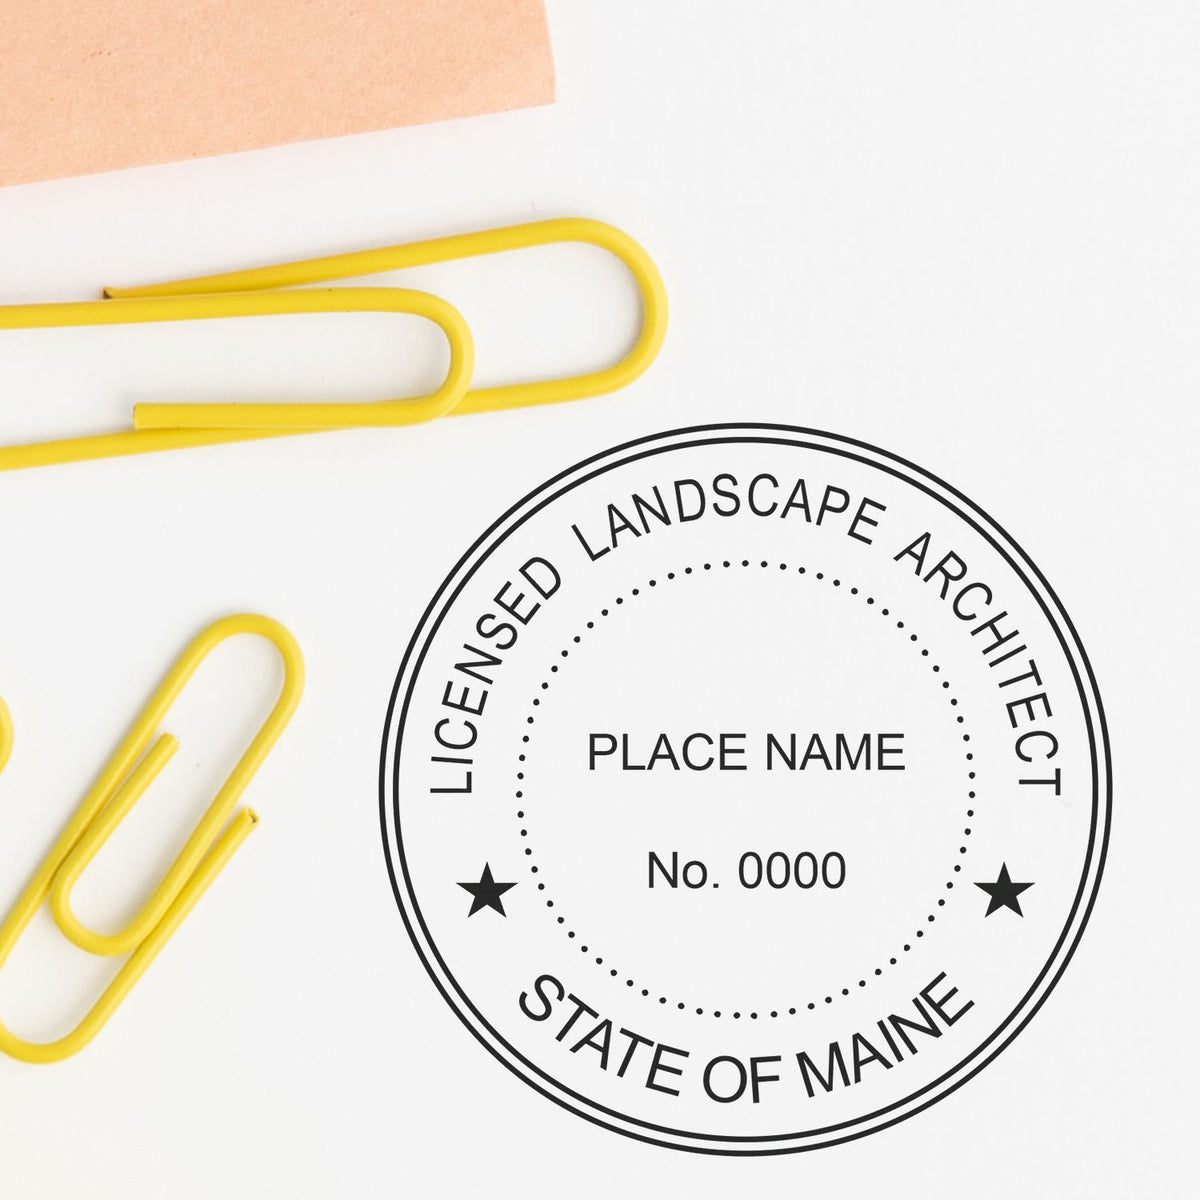 This paper is stamped with a sample imprint of the Maine Landscape Architectural Seal Stamp, signifying its quality and reliability.